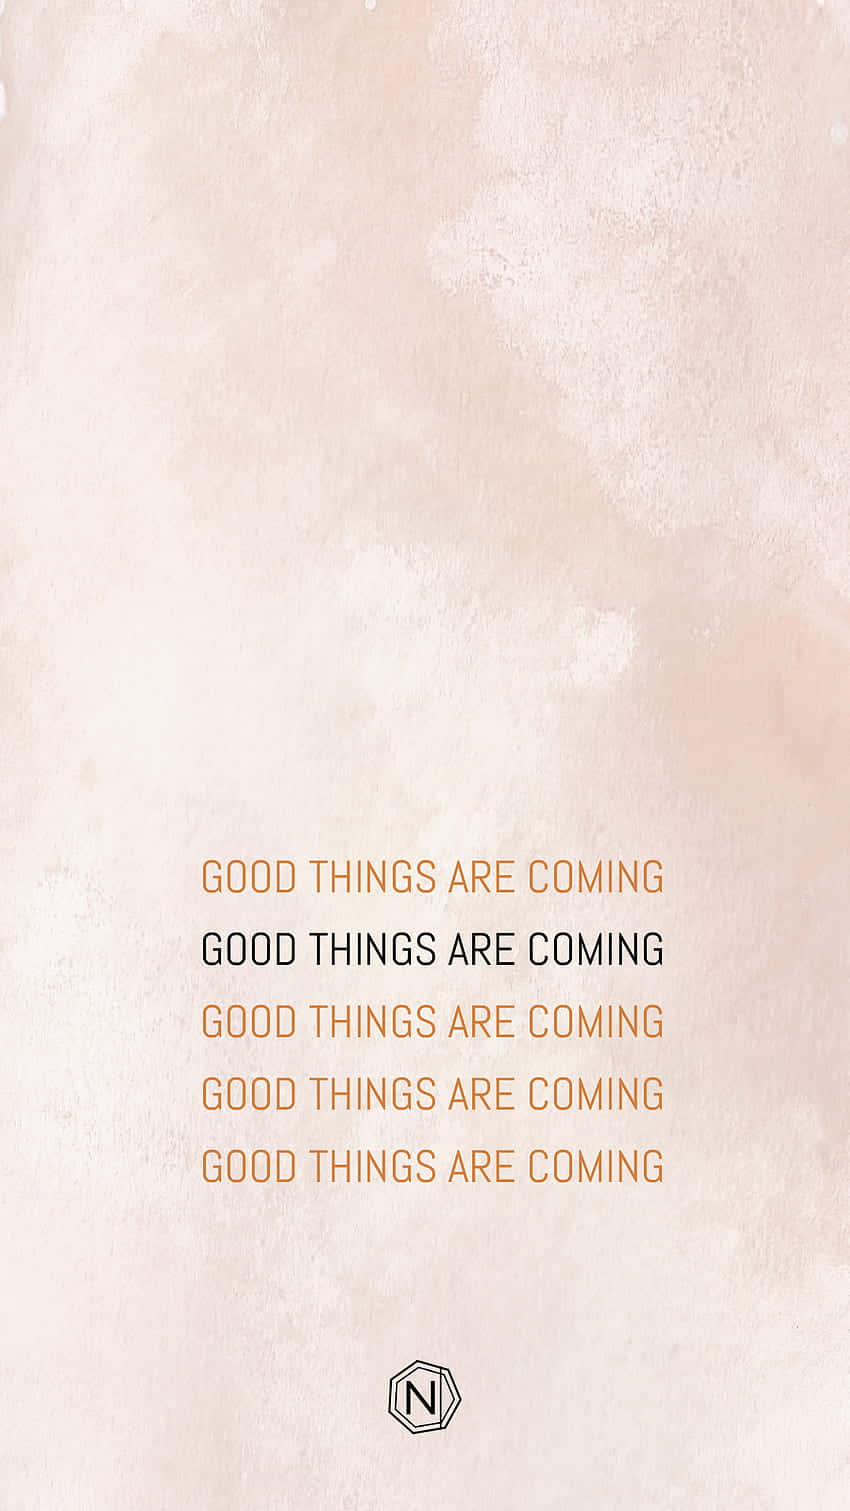 "Good things are coming. Believe it and make it happen." Wallpaper